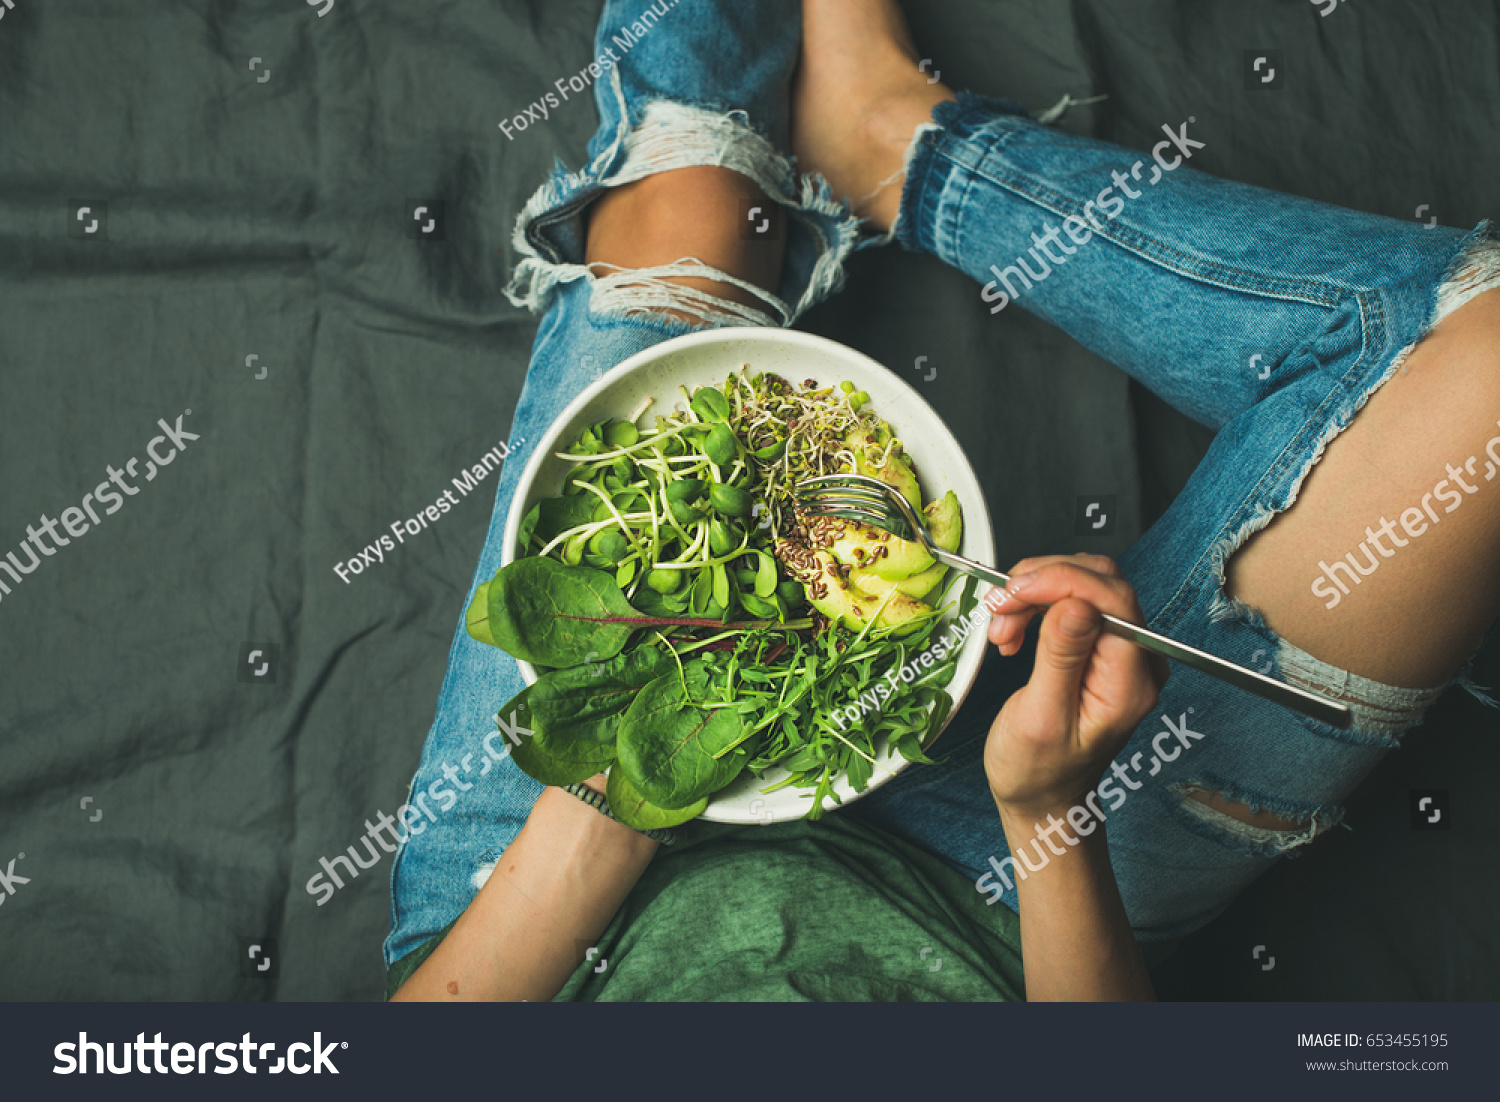 Green vegan breakfast meal in bowl with spinach, arugula, avocado, seeds and sprouts. Girl in jeans holding fork with knees and hands visible, top view, copy space. Clean eating, vegan food concept #653455195